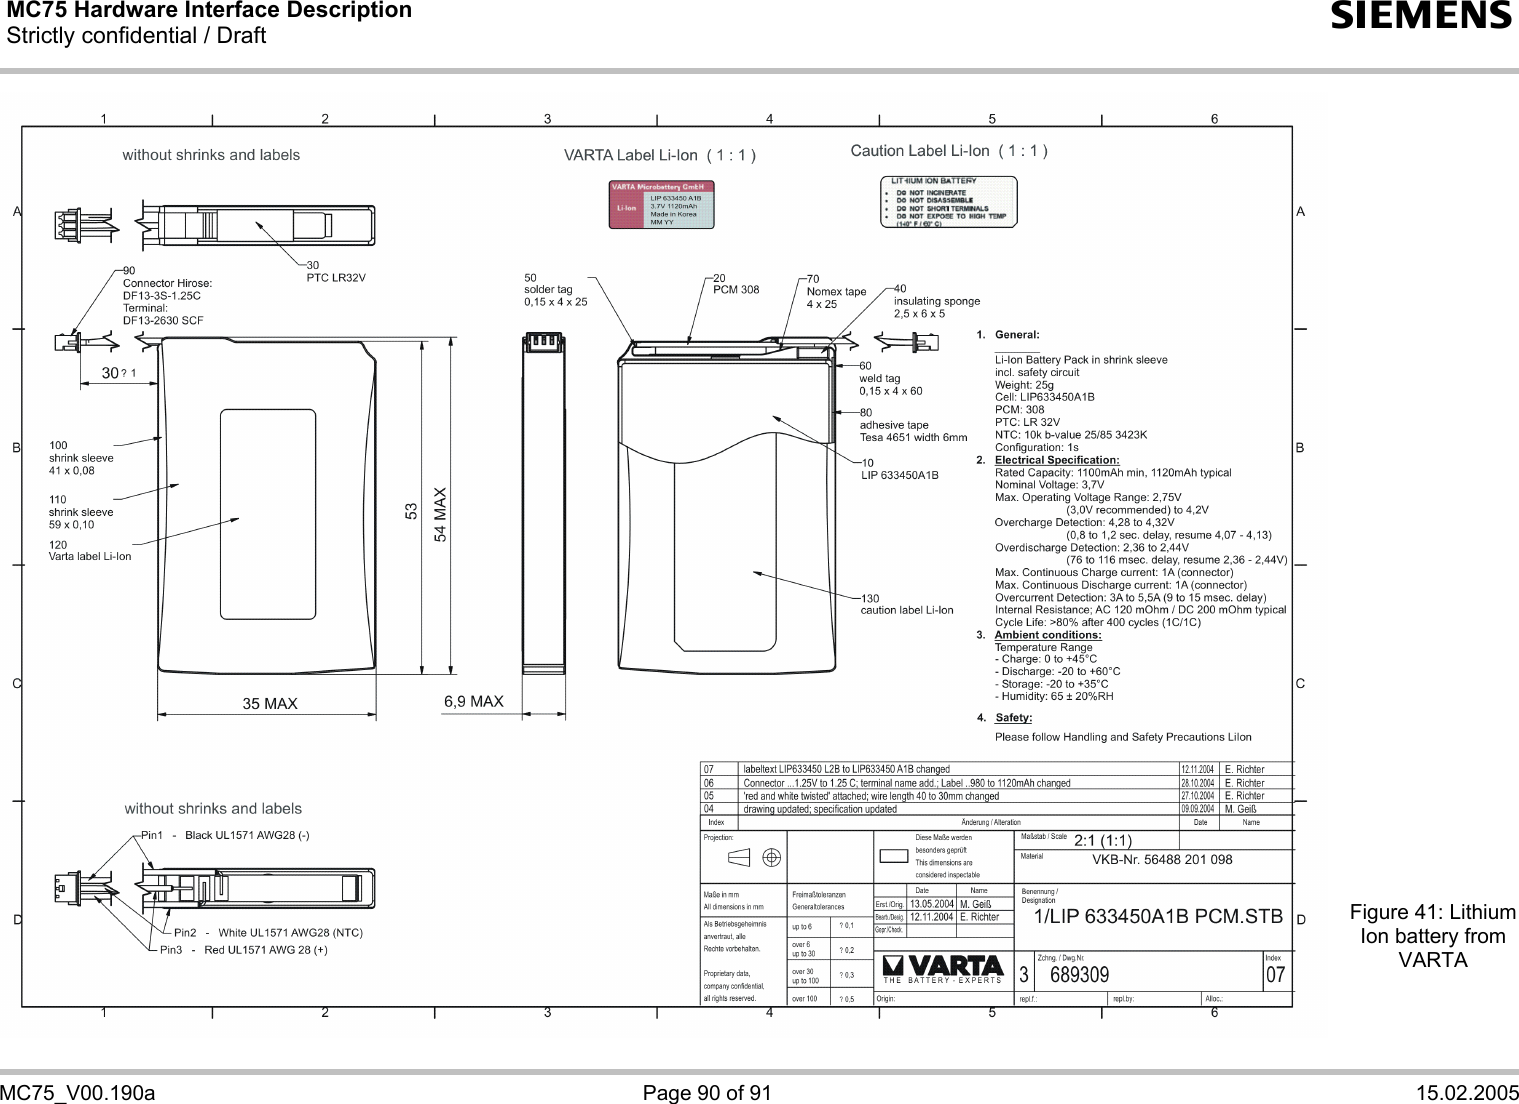 MC75 Hardware Interface Description Strictly confidential / Draft  s   MC75_V00.190a  Page 90 of 91  15.02.2005                               Figure 41: Lithium Ion battery from VARTA  